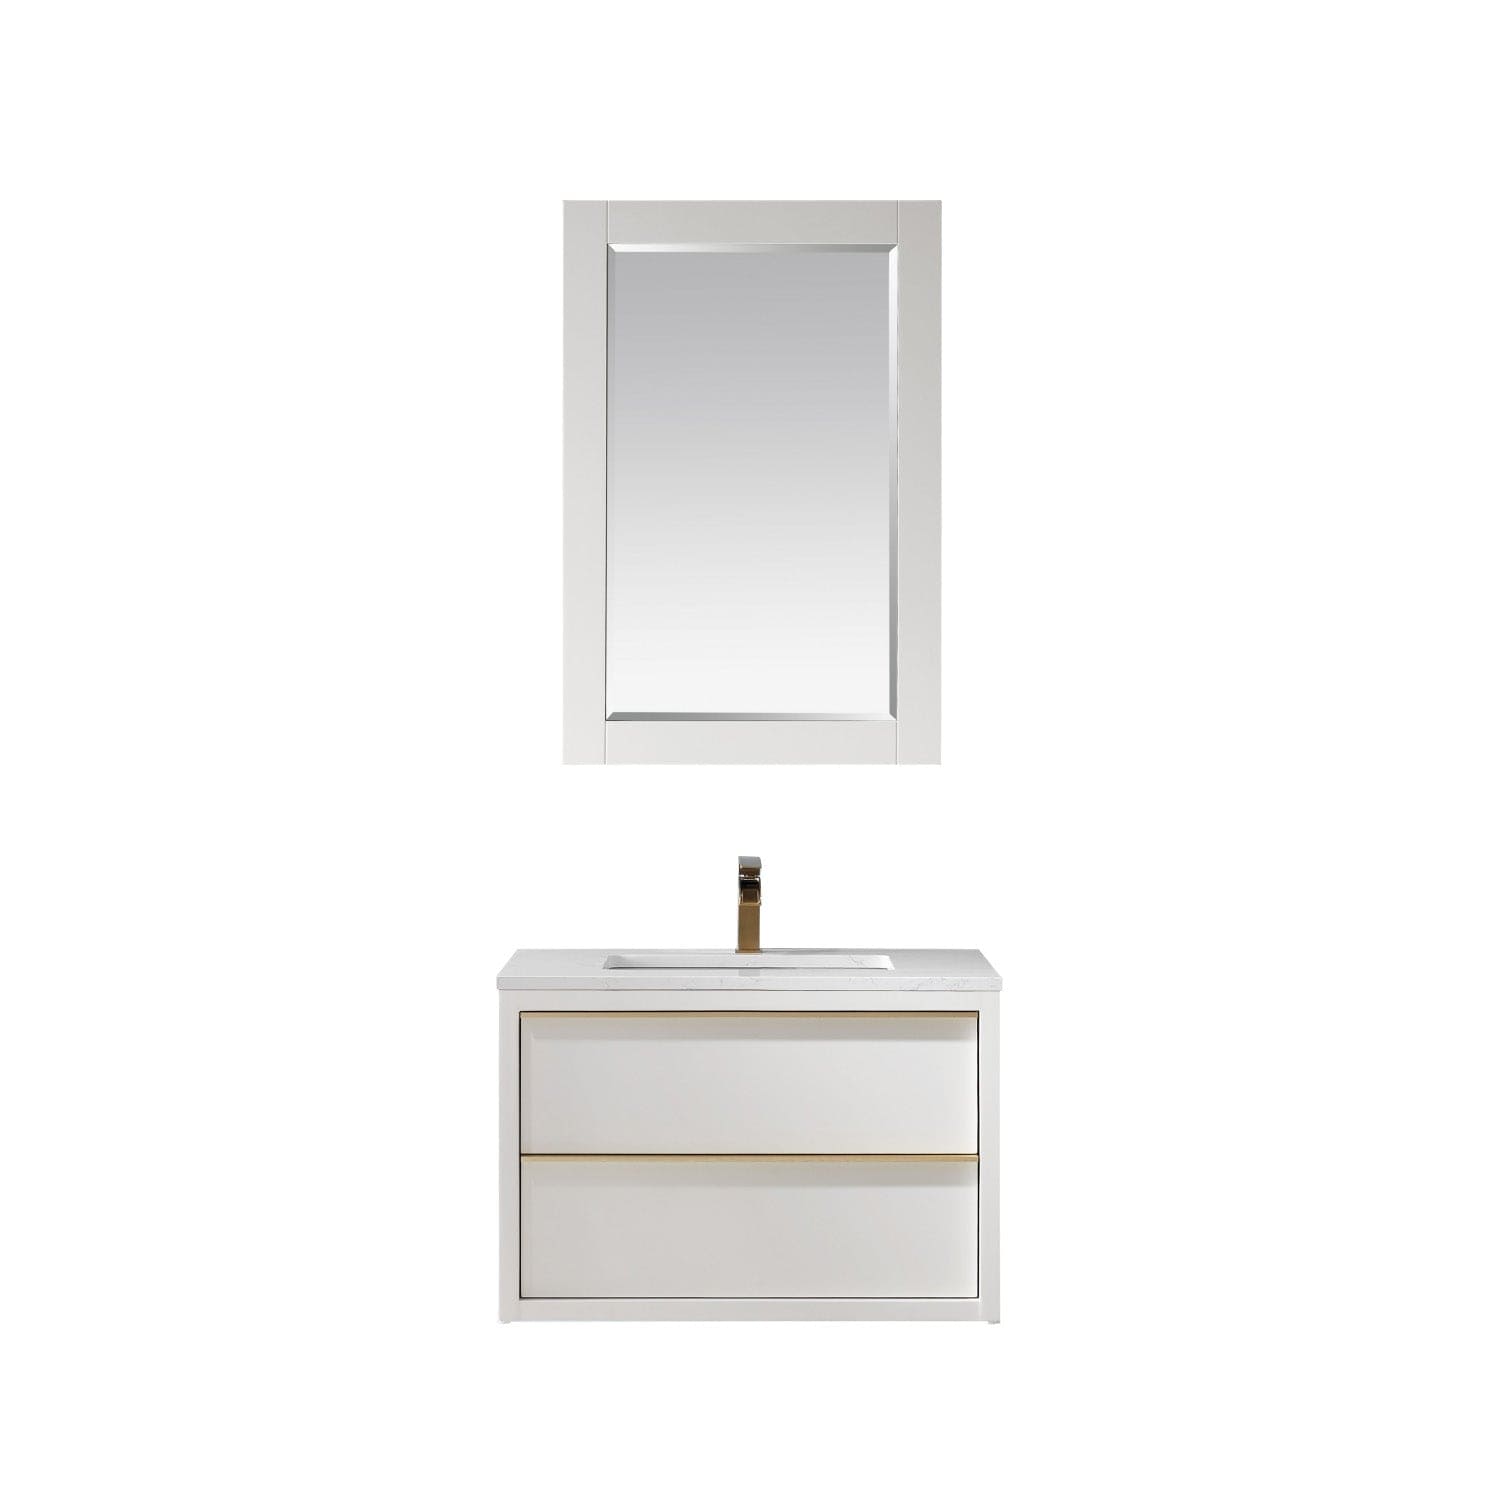 Altair Morgan 30" Single Bathroom Vanity Set in White and Composite Carrara White Stone Countertop with Mirror 534030-WH-AW - Molaix631112971737Vanity534030-WH-AW